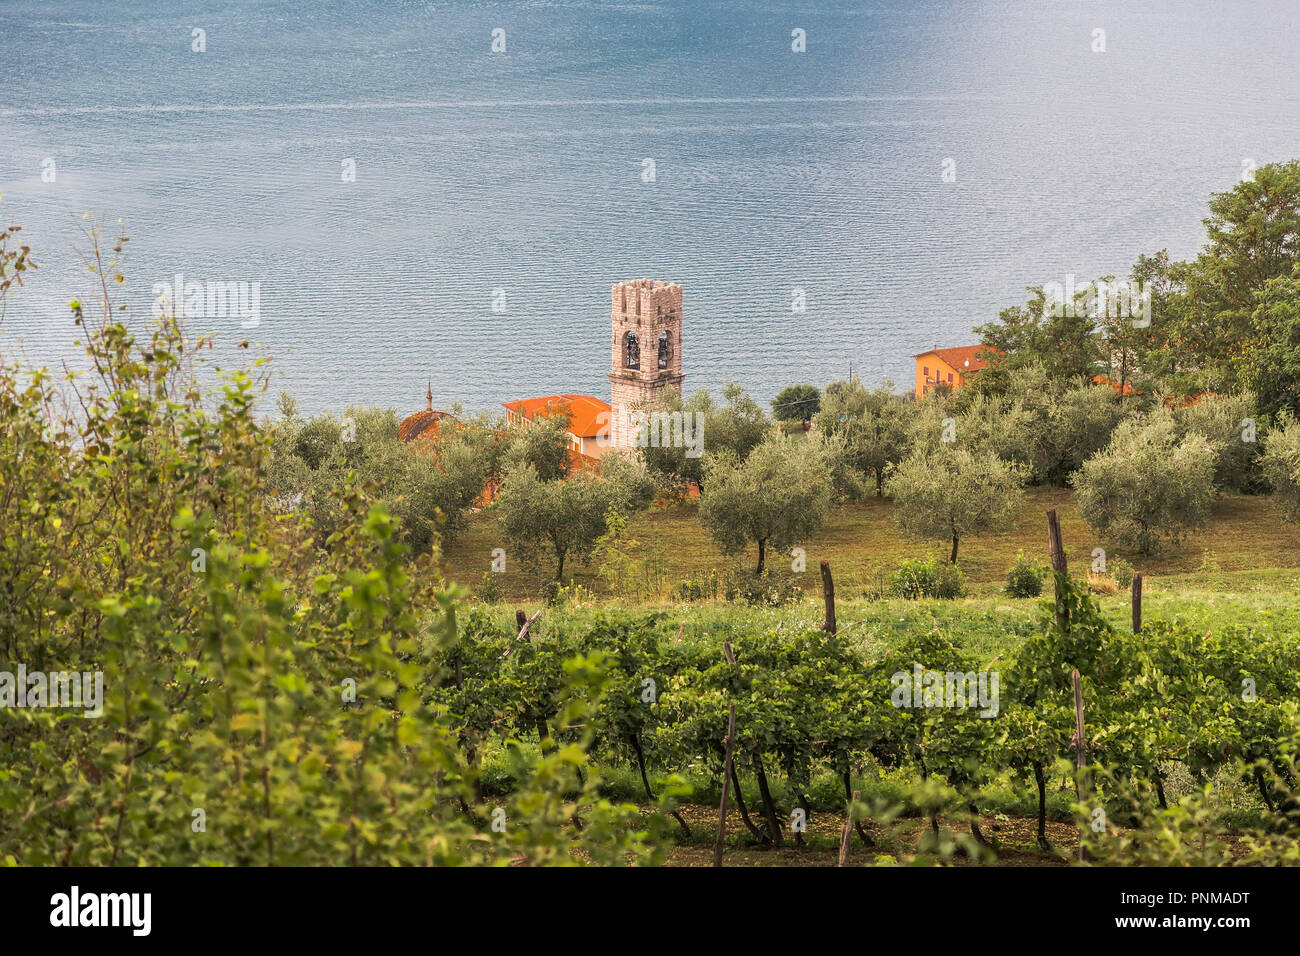 The small village, olive trees and vineyards on the slopes of Monte Isola island in Lake Iseo. Italy Stock Photo